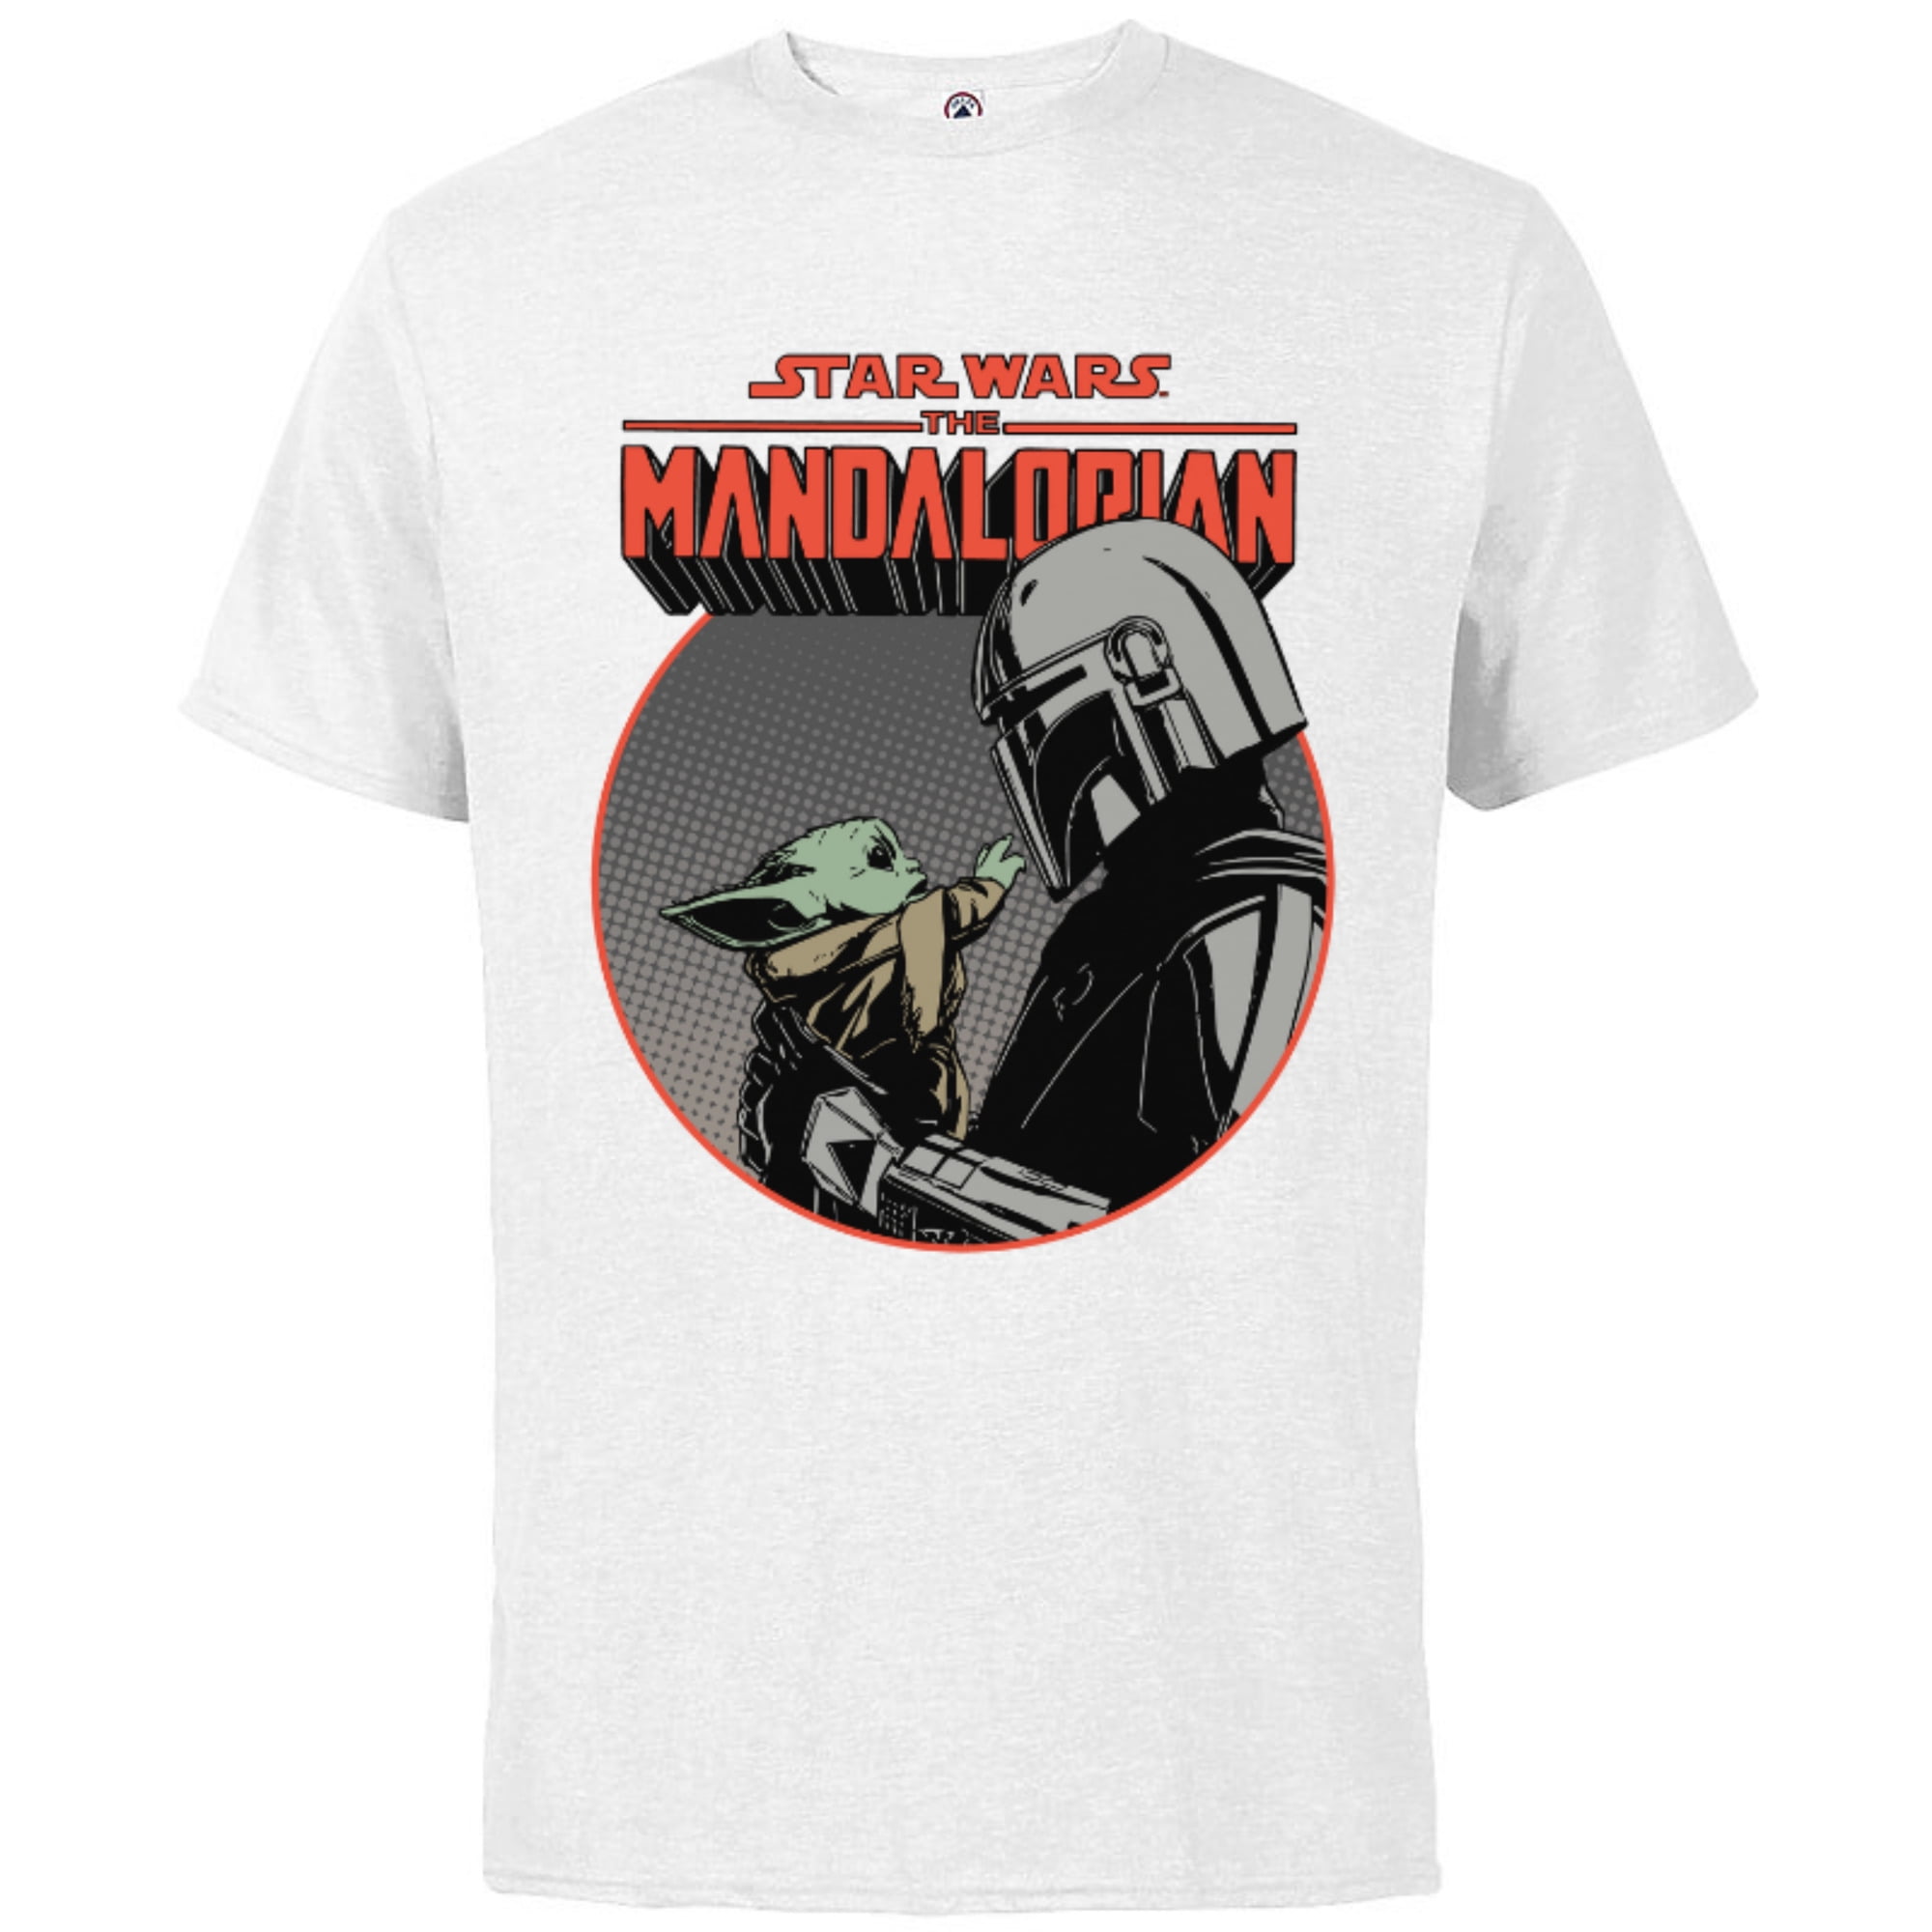 Star Wars The Mandalorian Mando and the Child Retro - Short Sleeve Cotton T- Shirt for Adults - Customized-White